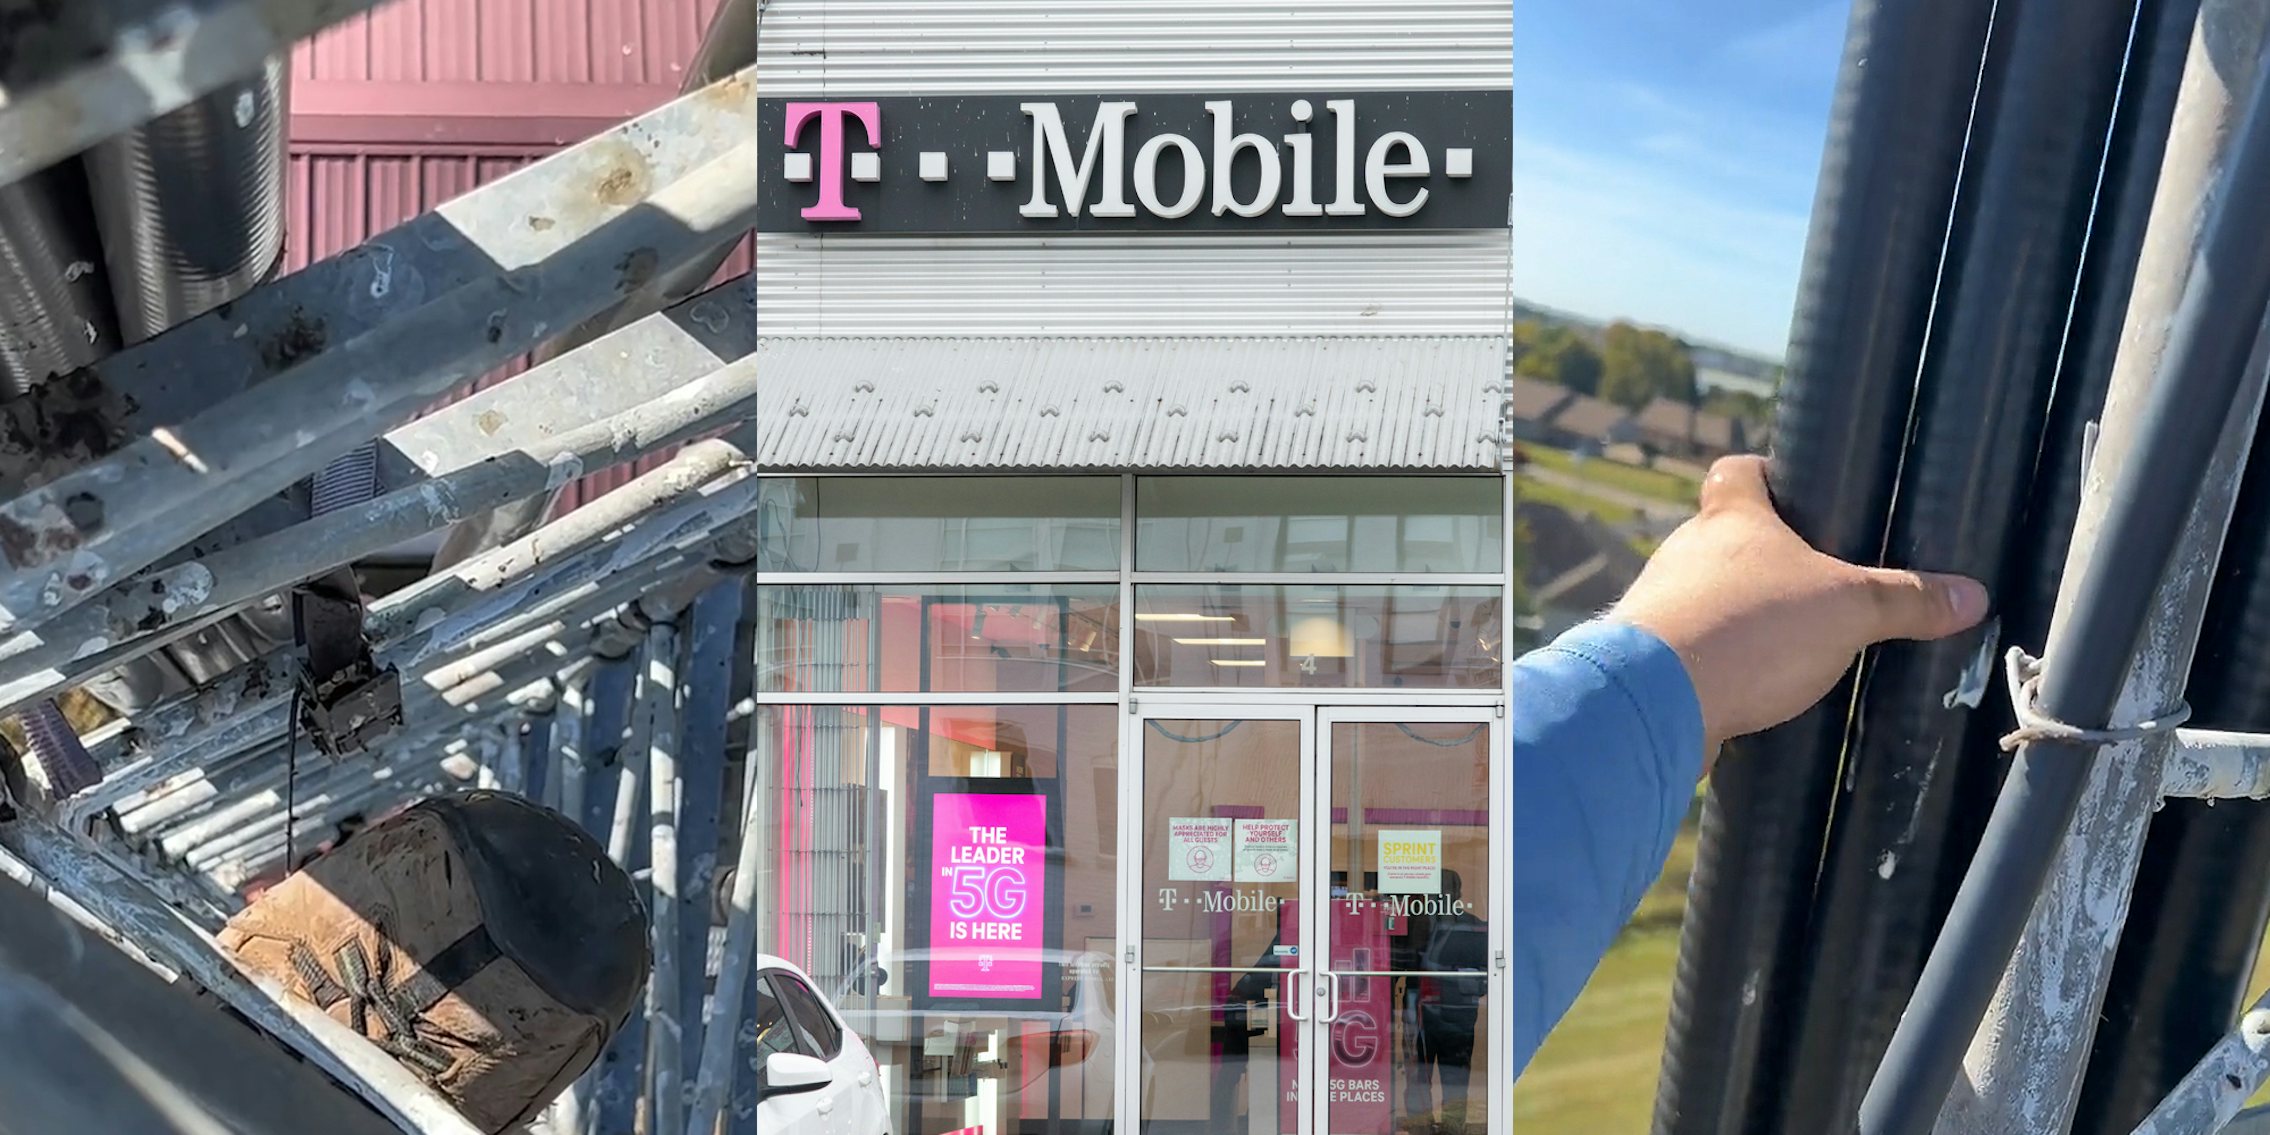 T Mobile 5G tower with ratchet strap supporting older 3G cabling to tower (l) T-Mobile sign on building (c) man holding T Mobile tower cabling (r)